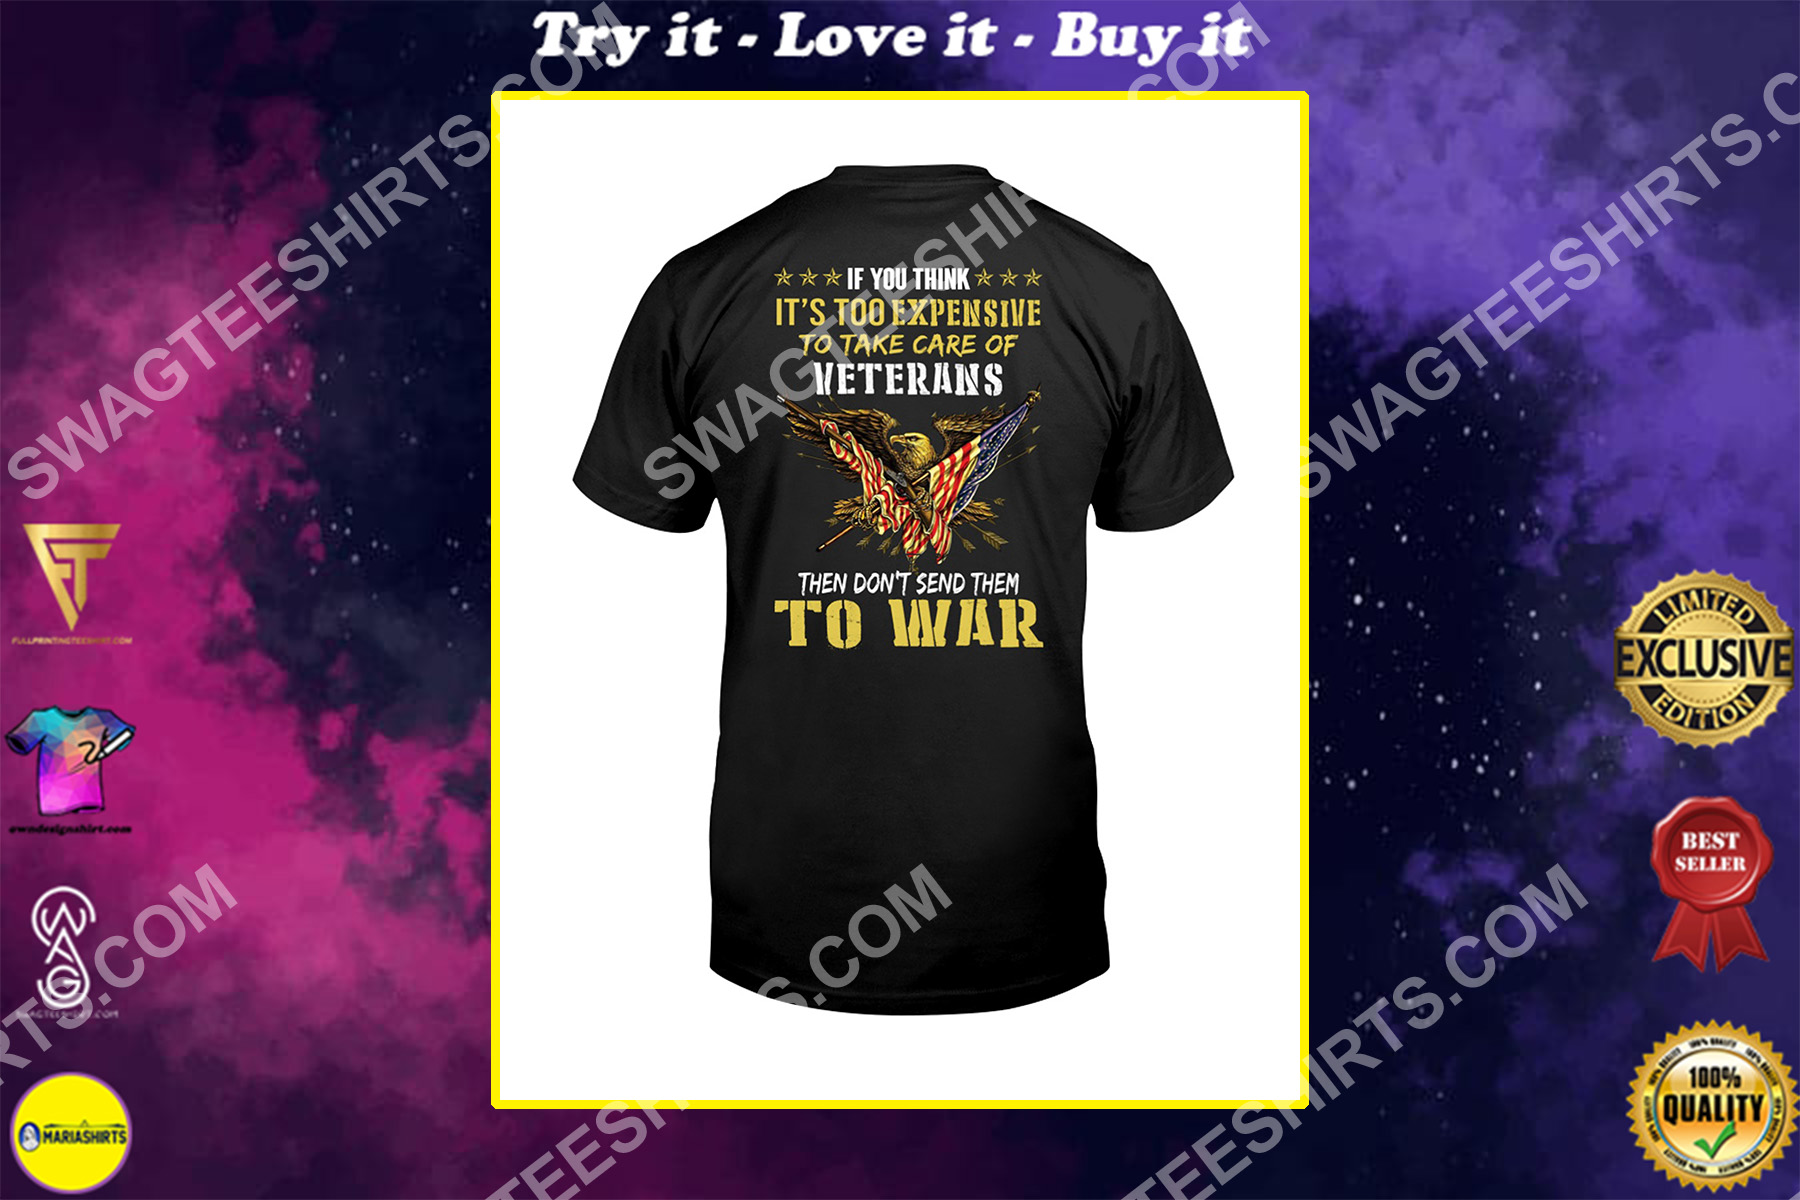 if you think it's too expensive to take of veterans then don't send them to war shirt